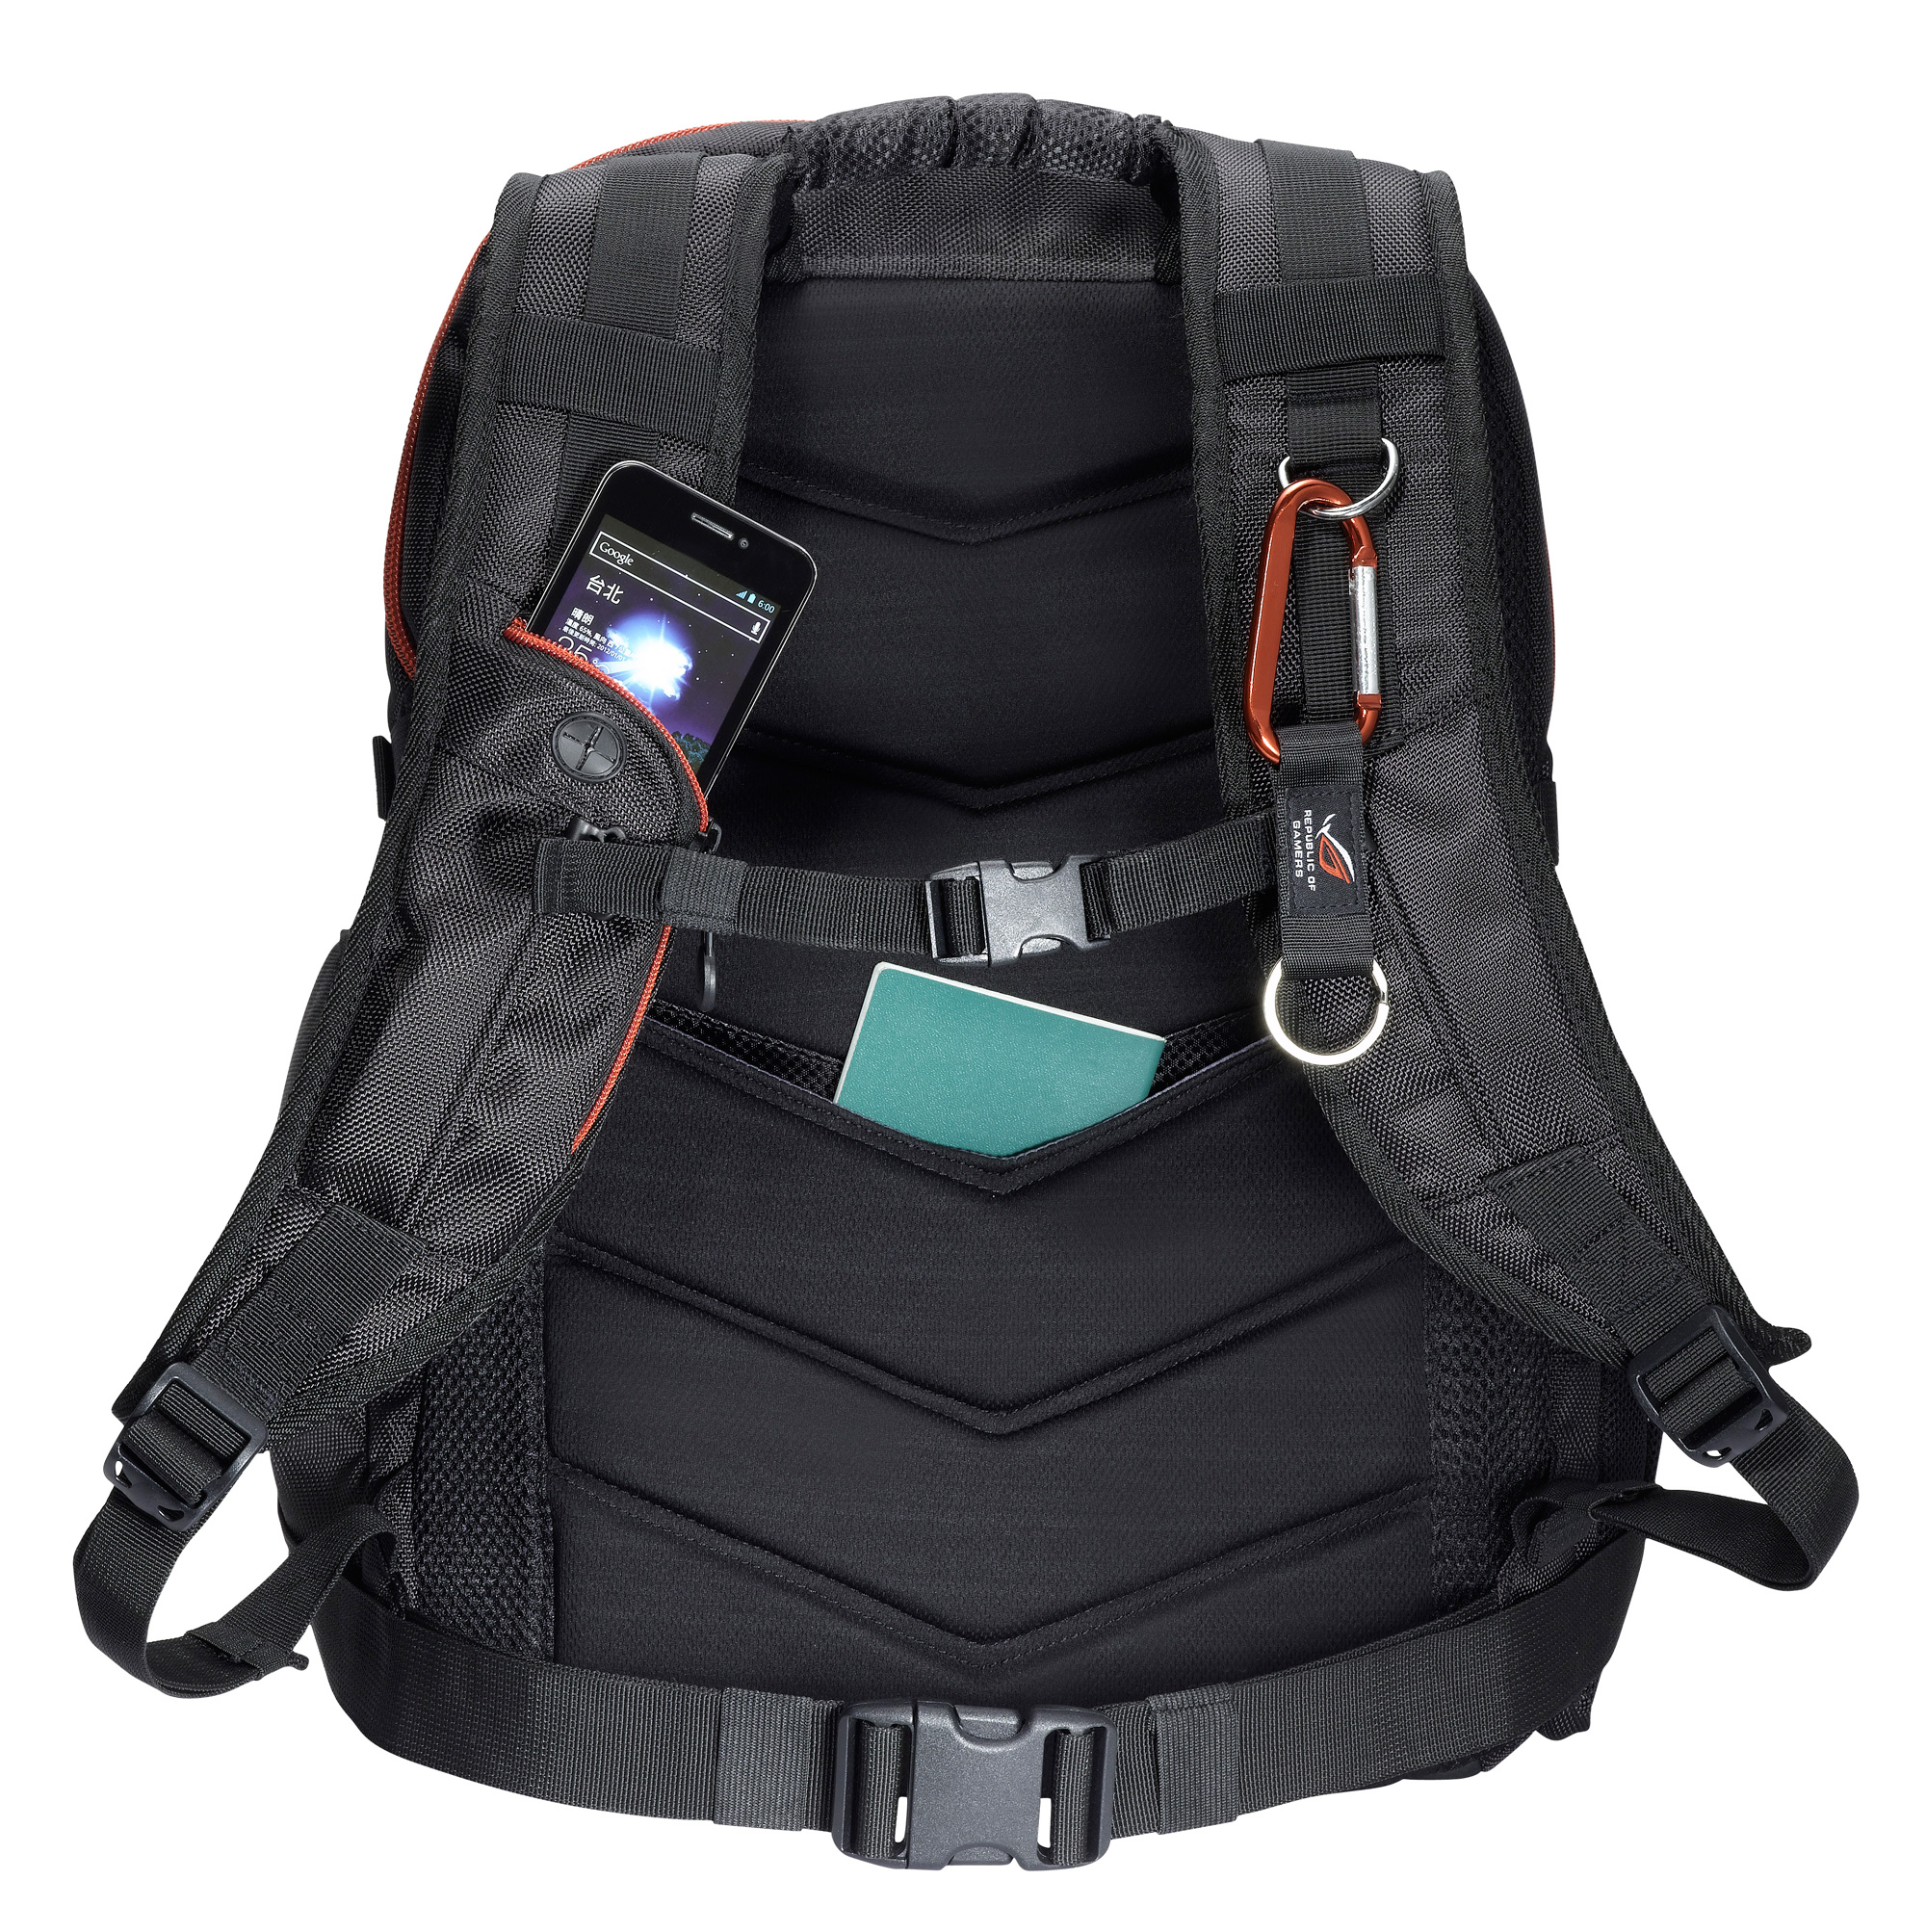 Asus Rog Nomad Backpack Protects Your Gaming Laptop Up To 17 Inches